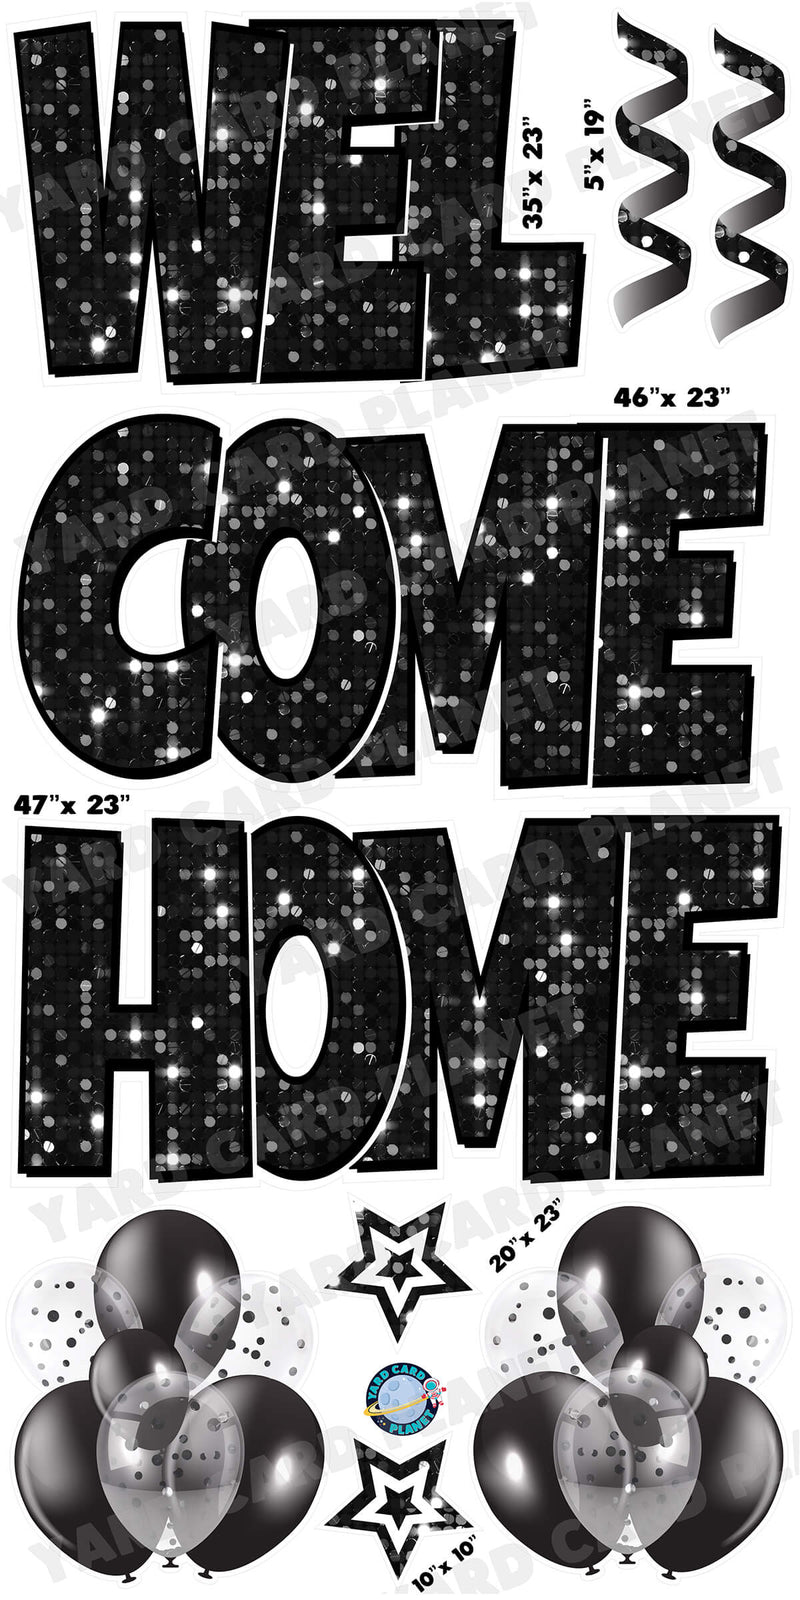 Large 23" Welcome Home Yard Card EZ Quick Sets in Luckiest Guy Font and Flair in Black Sequin Pattern